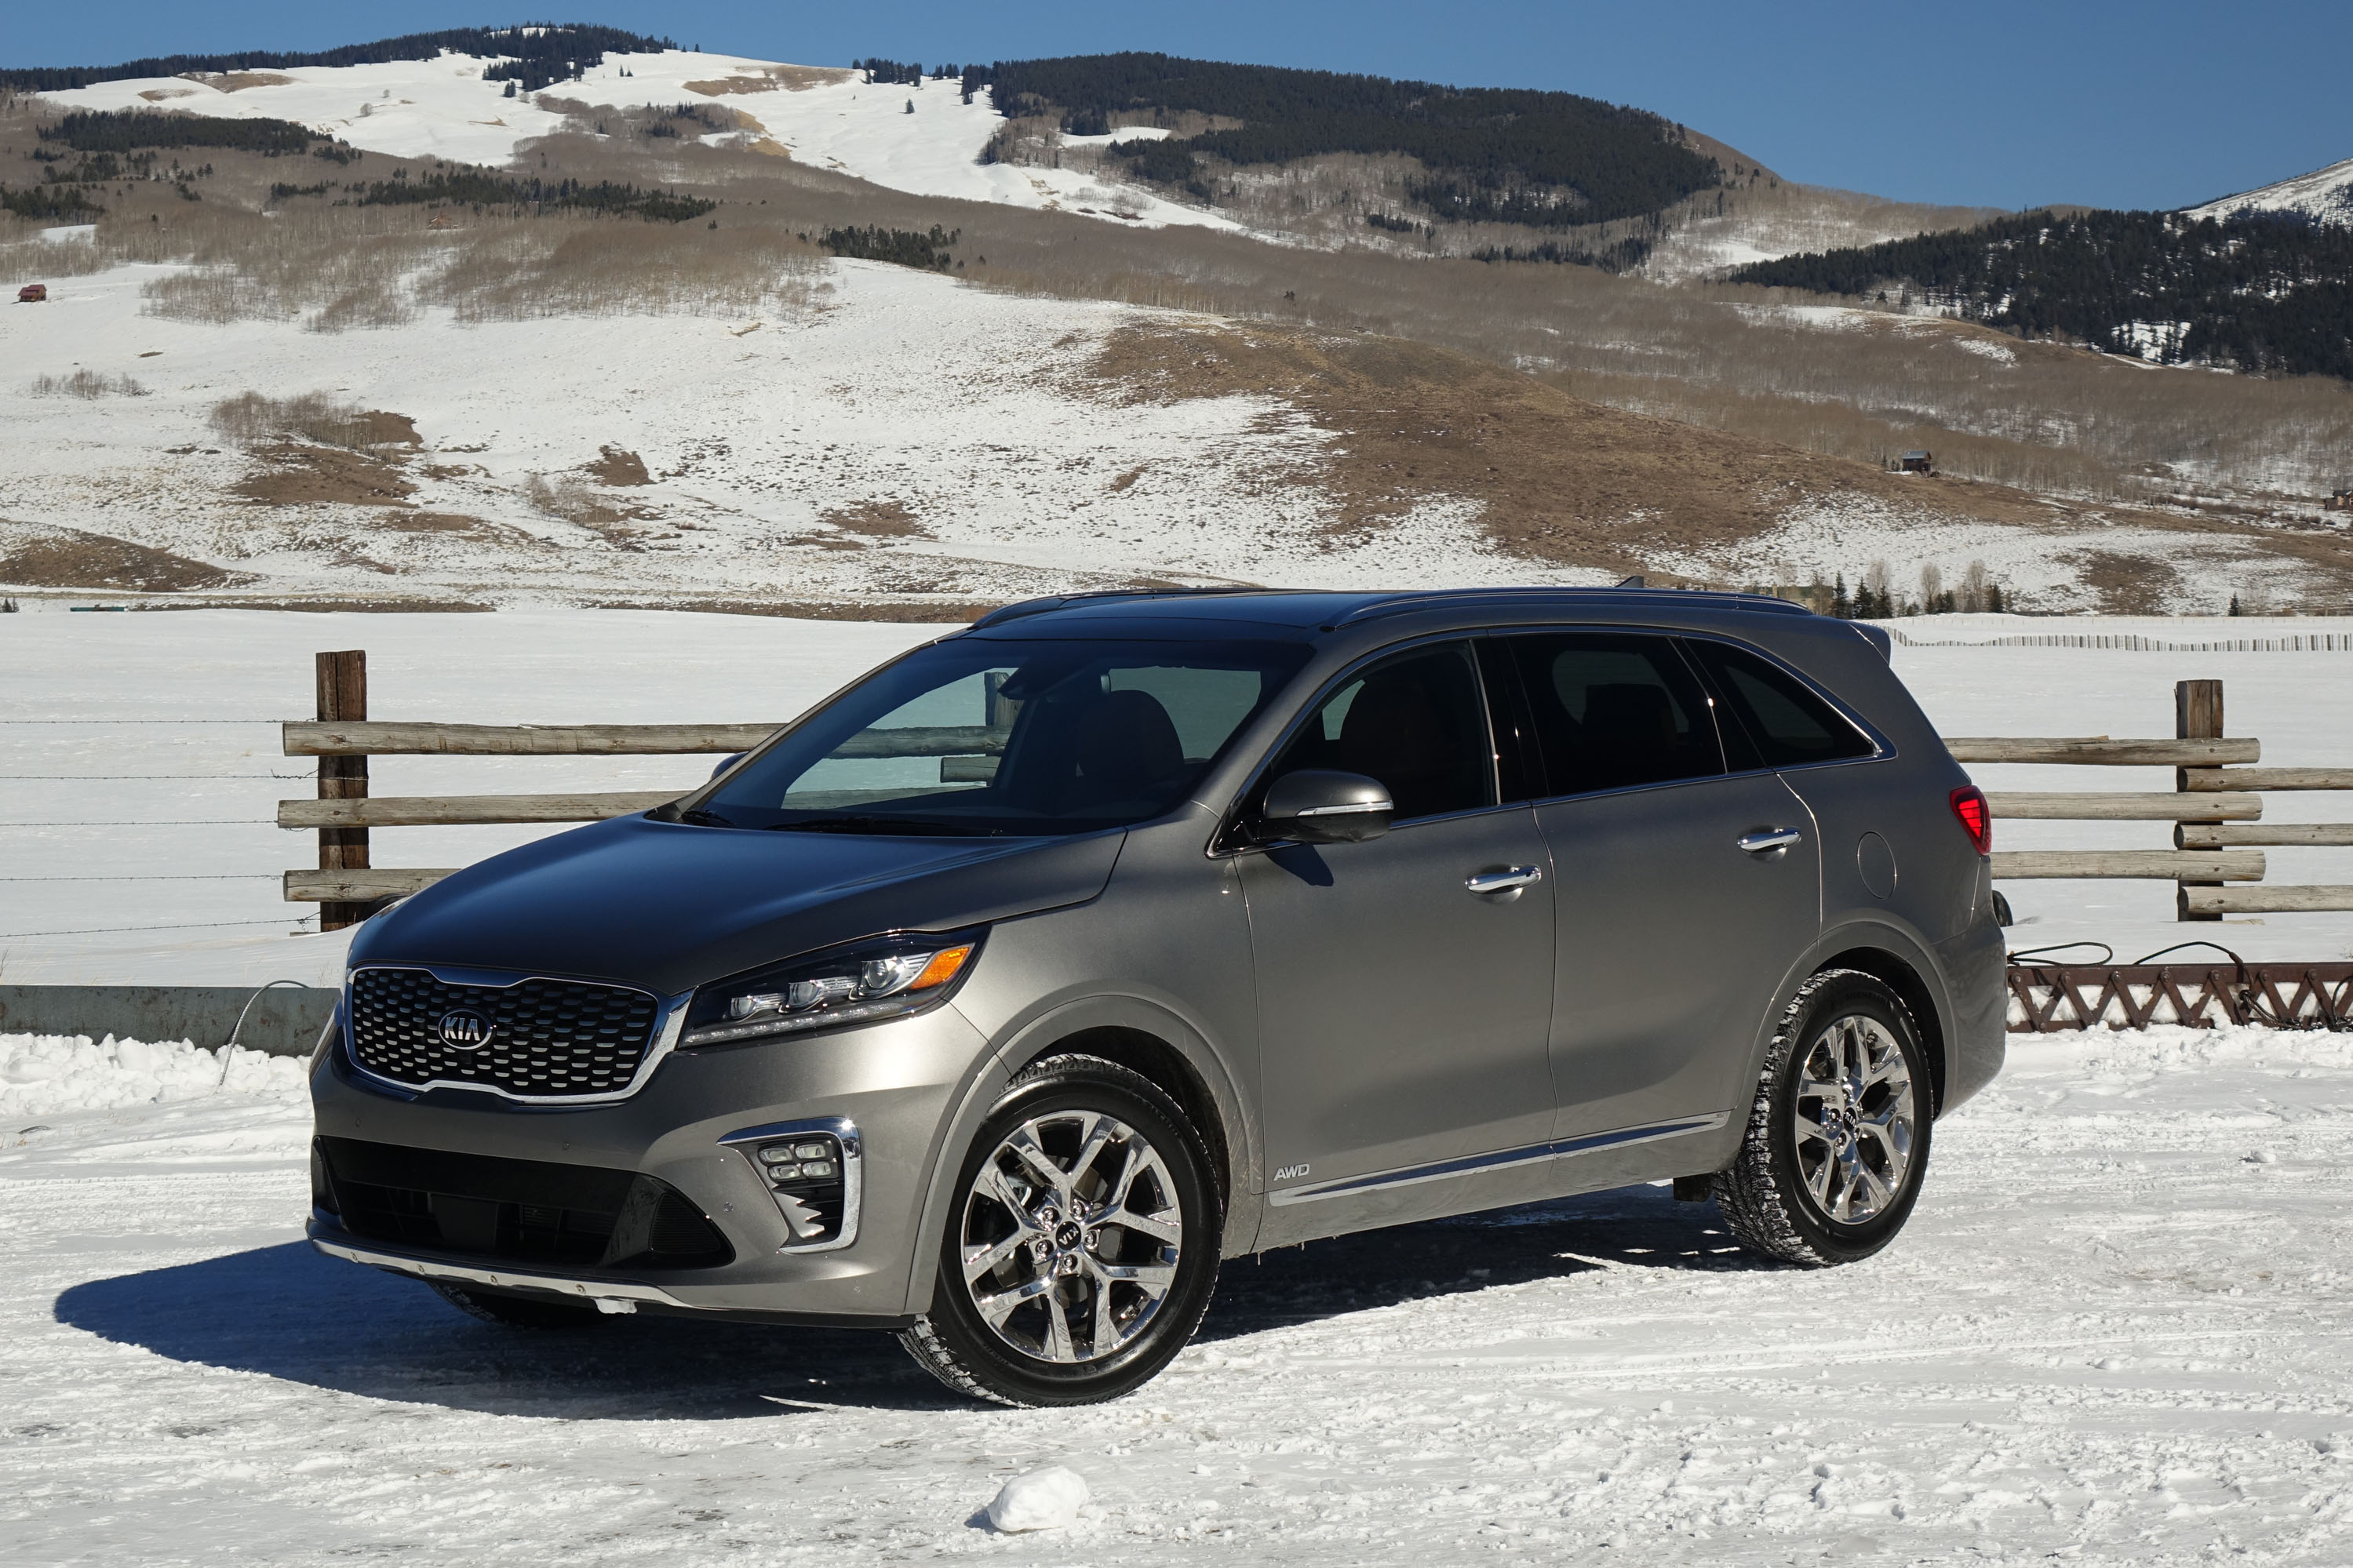 2019 Kia Sorento first drive: a subtly better crossover